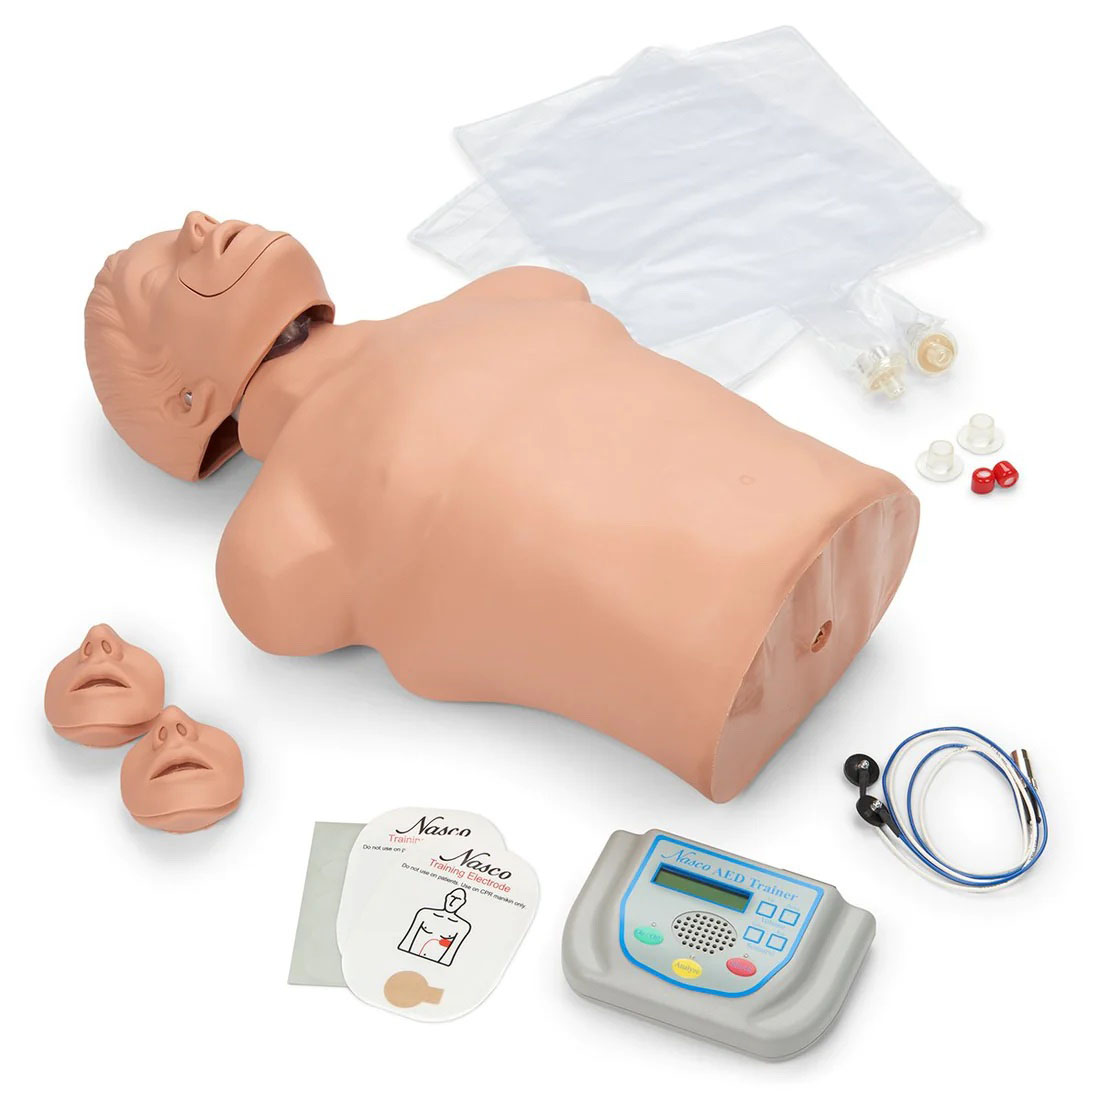 AED Trainer Package With CPR Brad